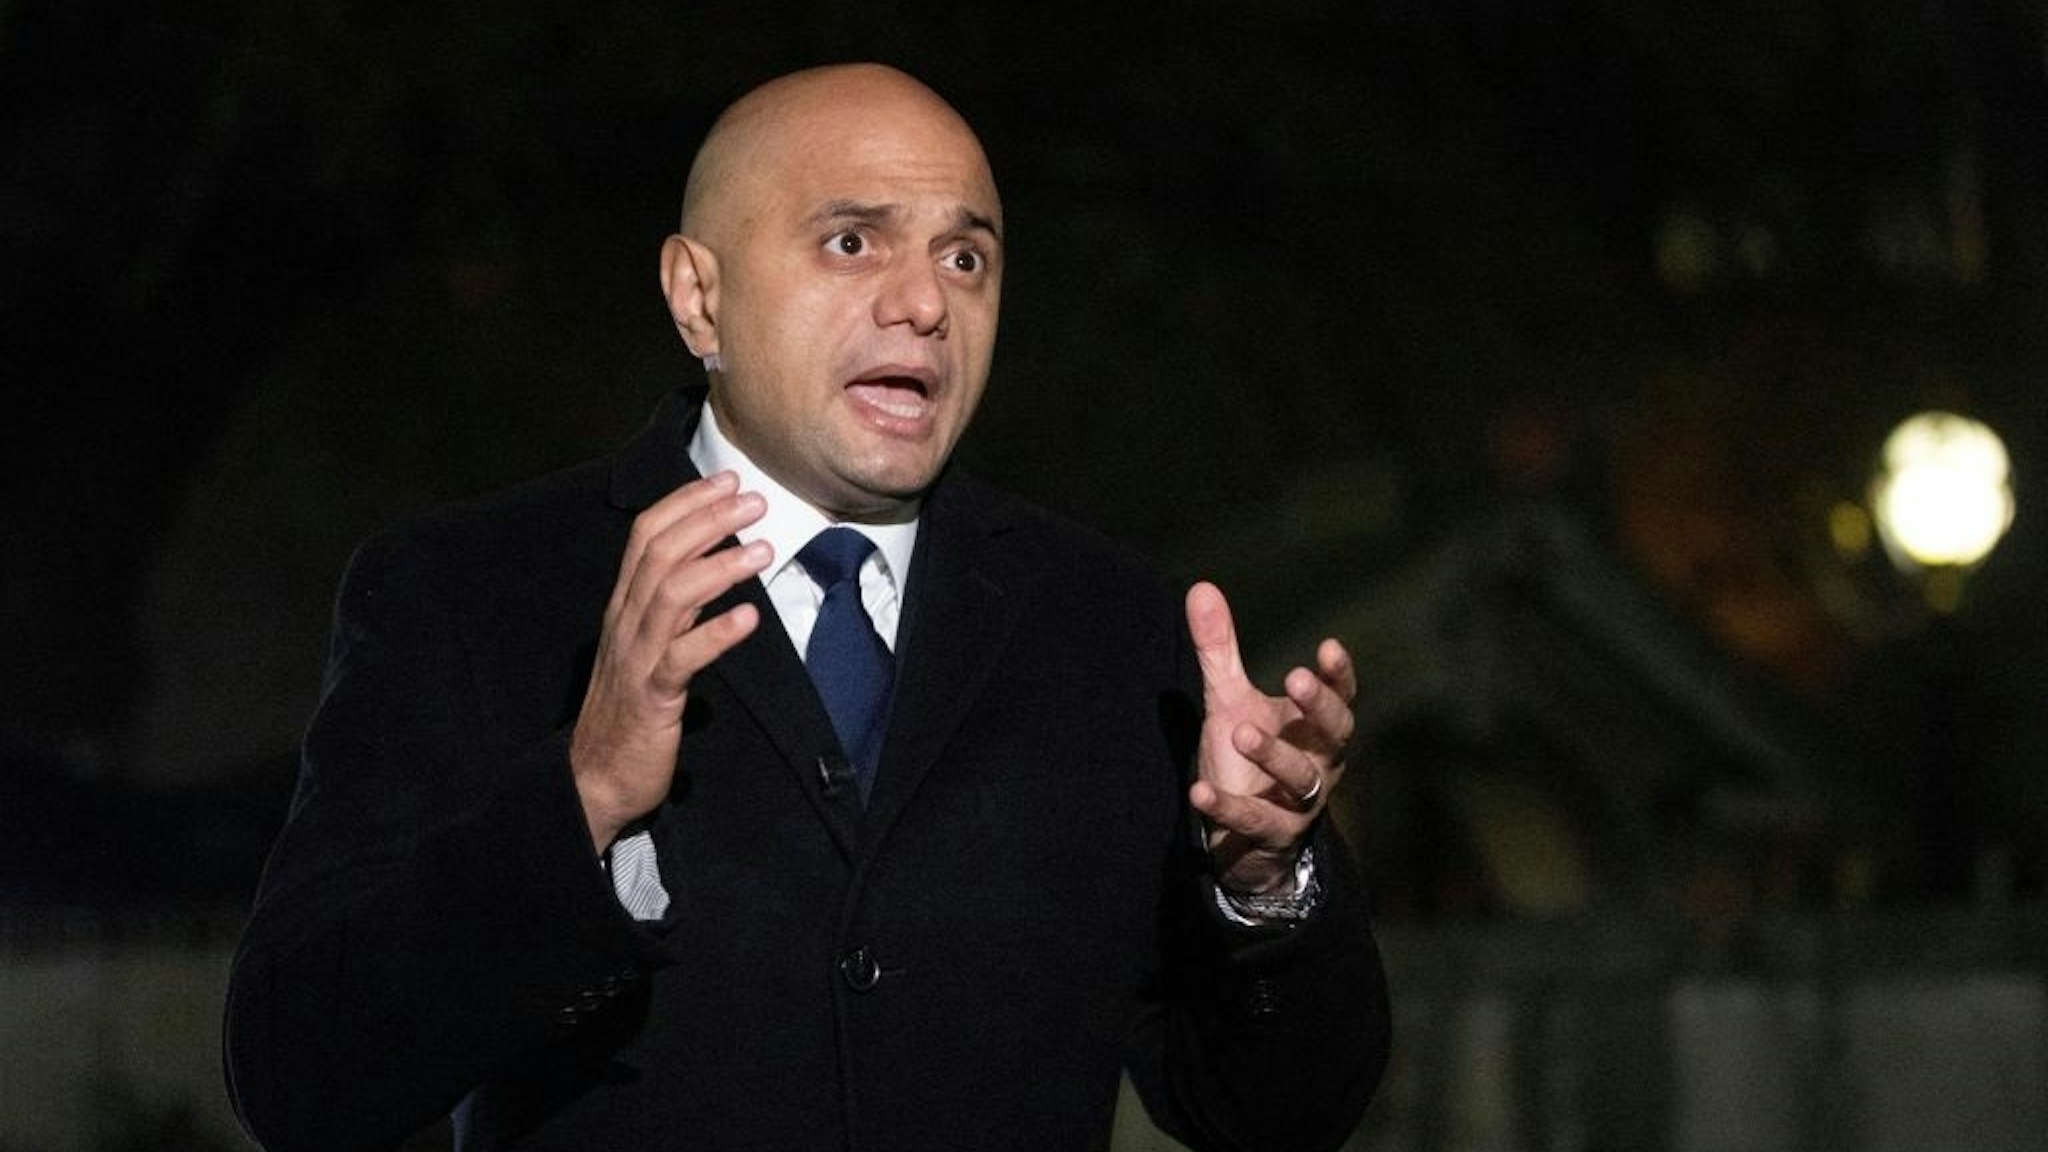 Britain's Health Secretary Sajid Javid speaks to members of the media during his visit to a Covid-19 vaccination centre at Guy's and St Thomas' Hospital in central London on November 29, 2021.